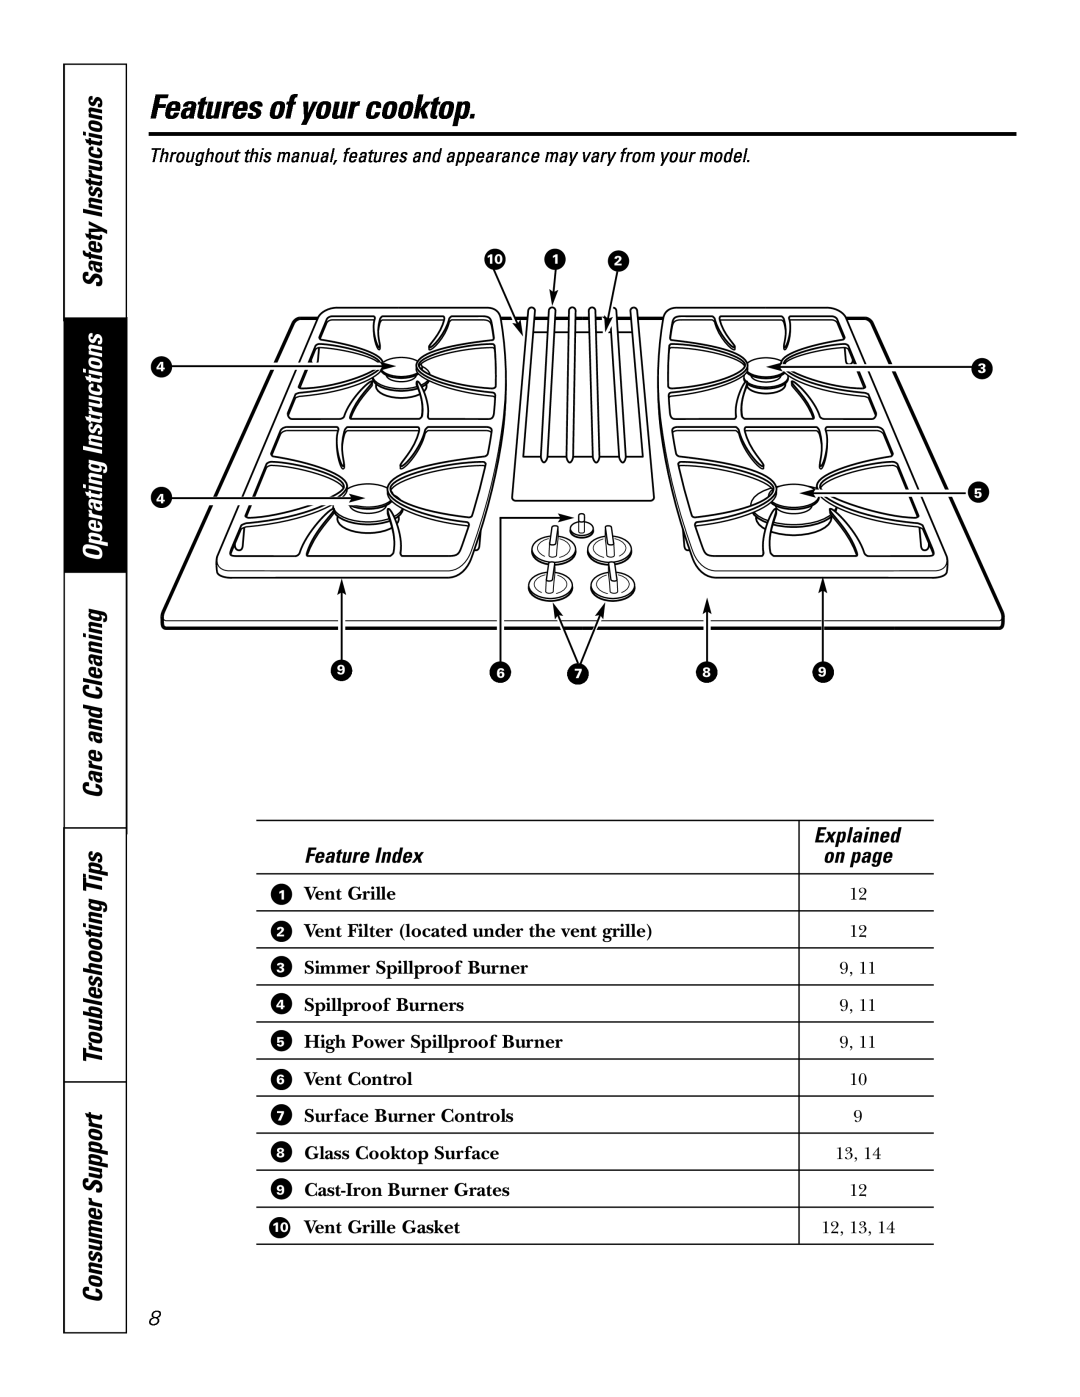 GE JGP989 manual Features of your cooktop, Feature Index, Explained 